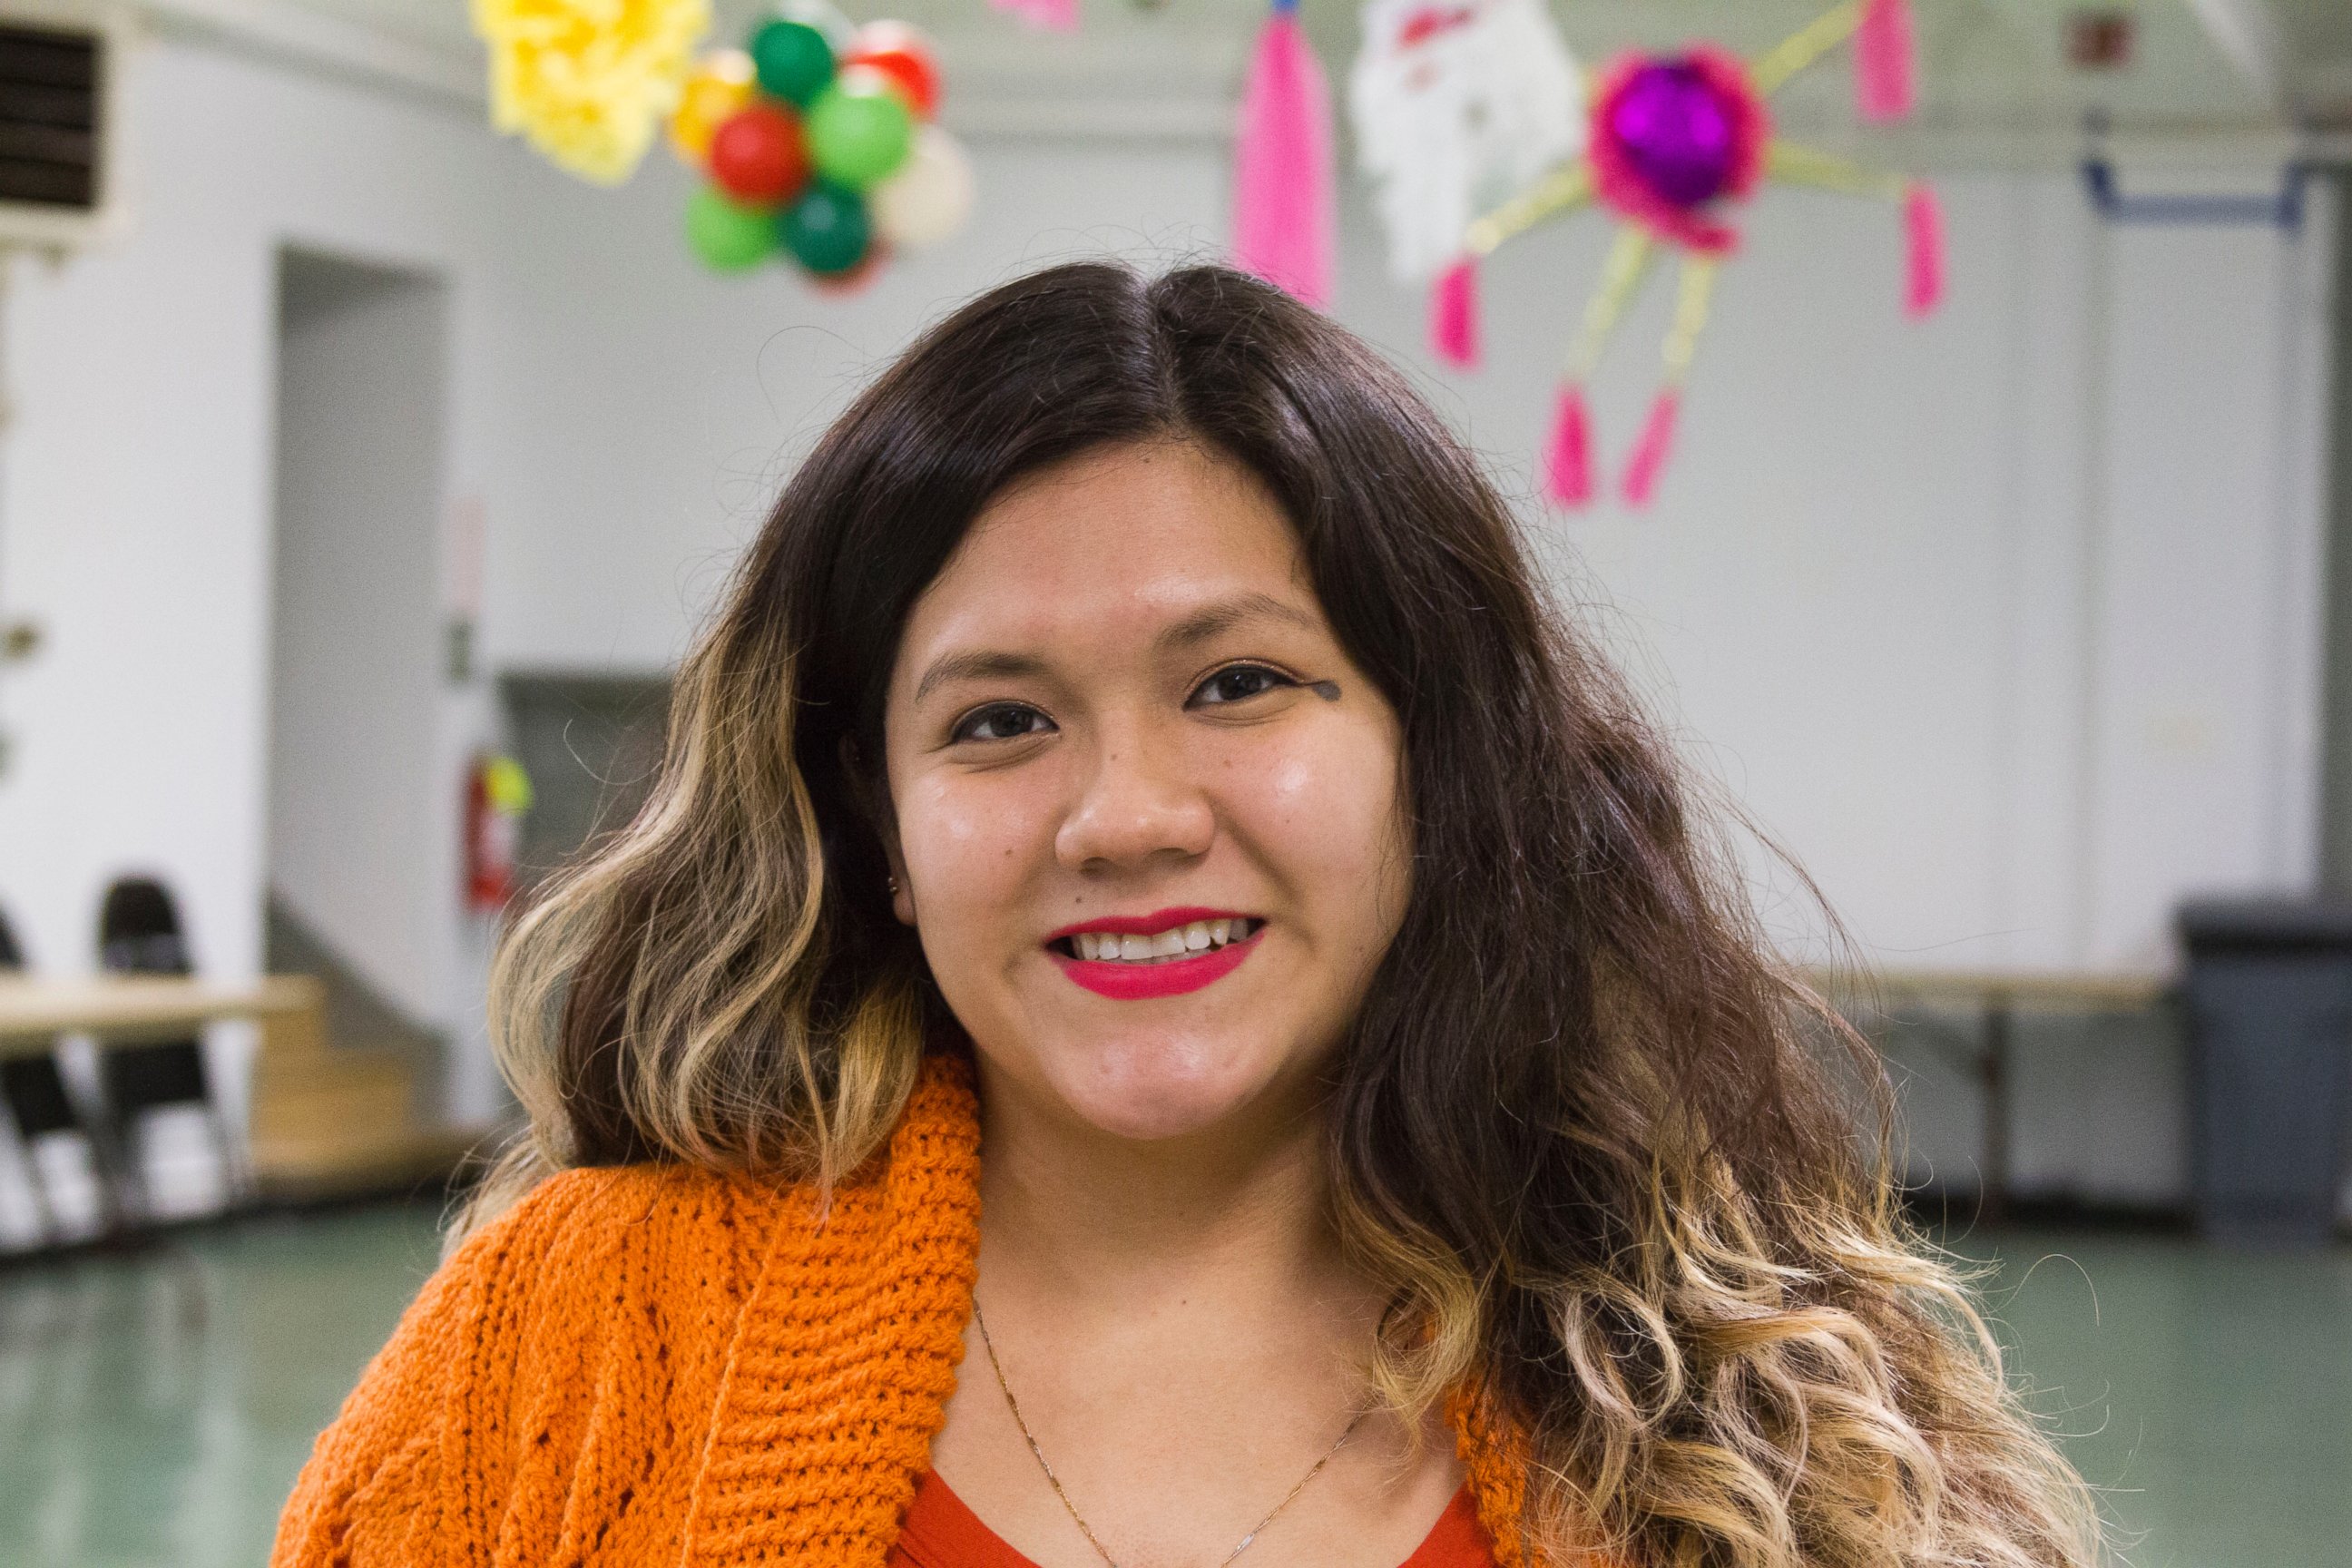 PHOTO: Olivia Vasquez is a community organizer with Juntos, an immigrants rights organization. She has helped Garcia and his family throughout his detention and time in sanctuary.